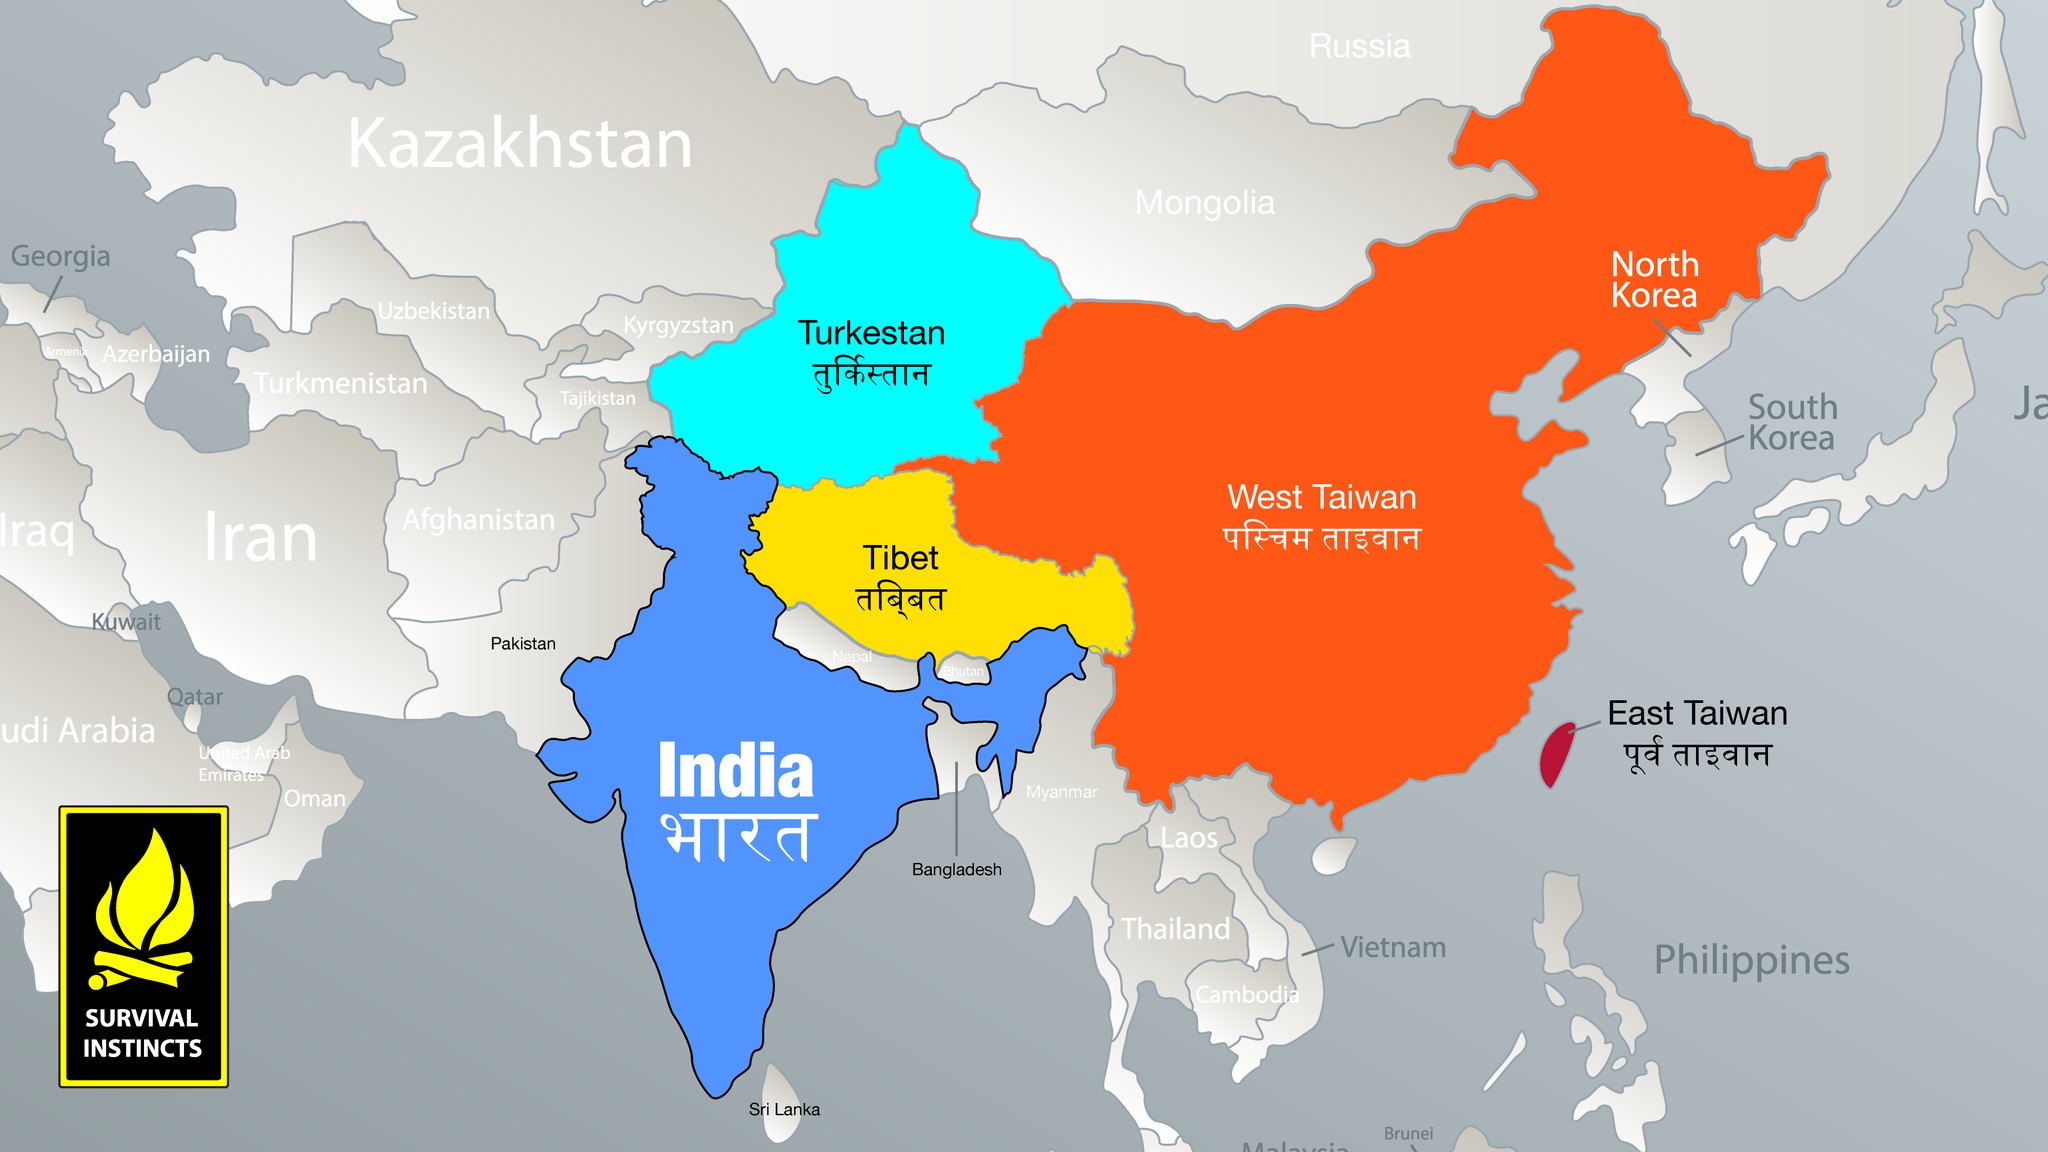 Spread Awareness: What if India Changes the Names of Places in China